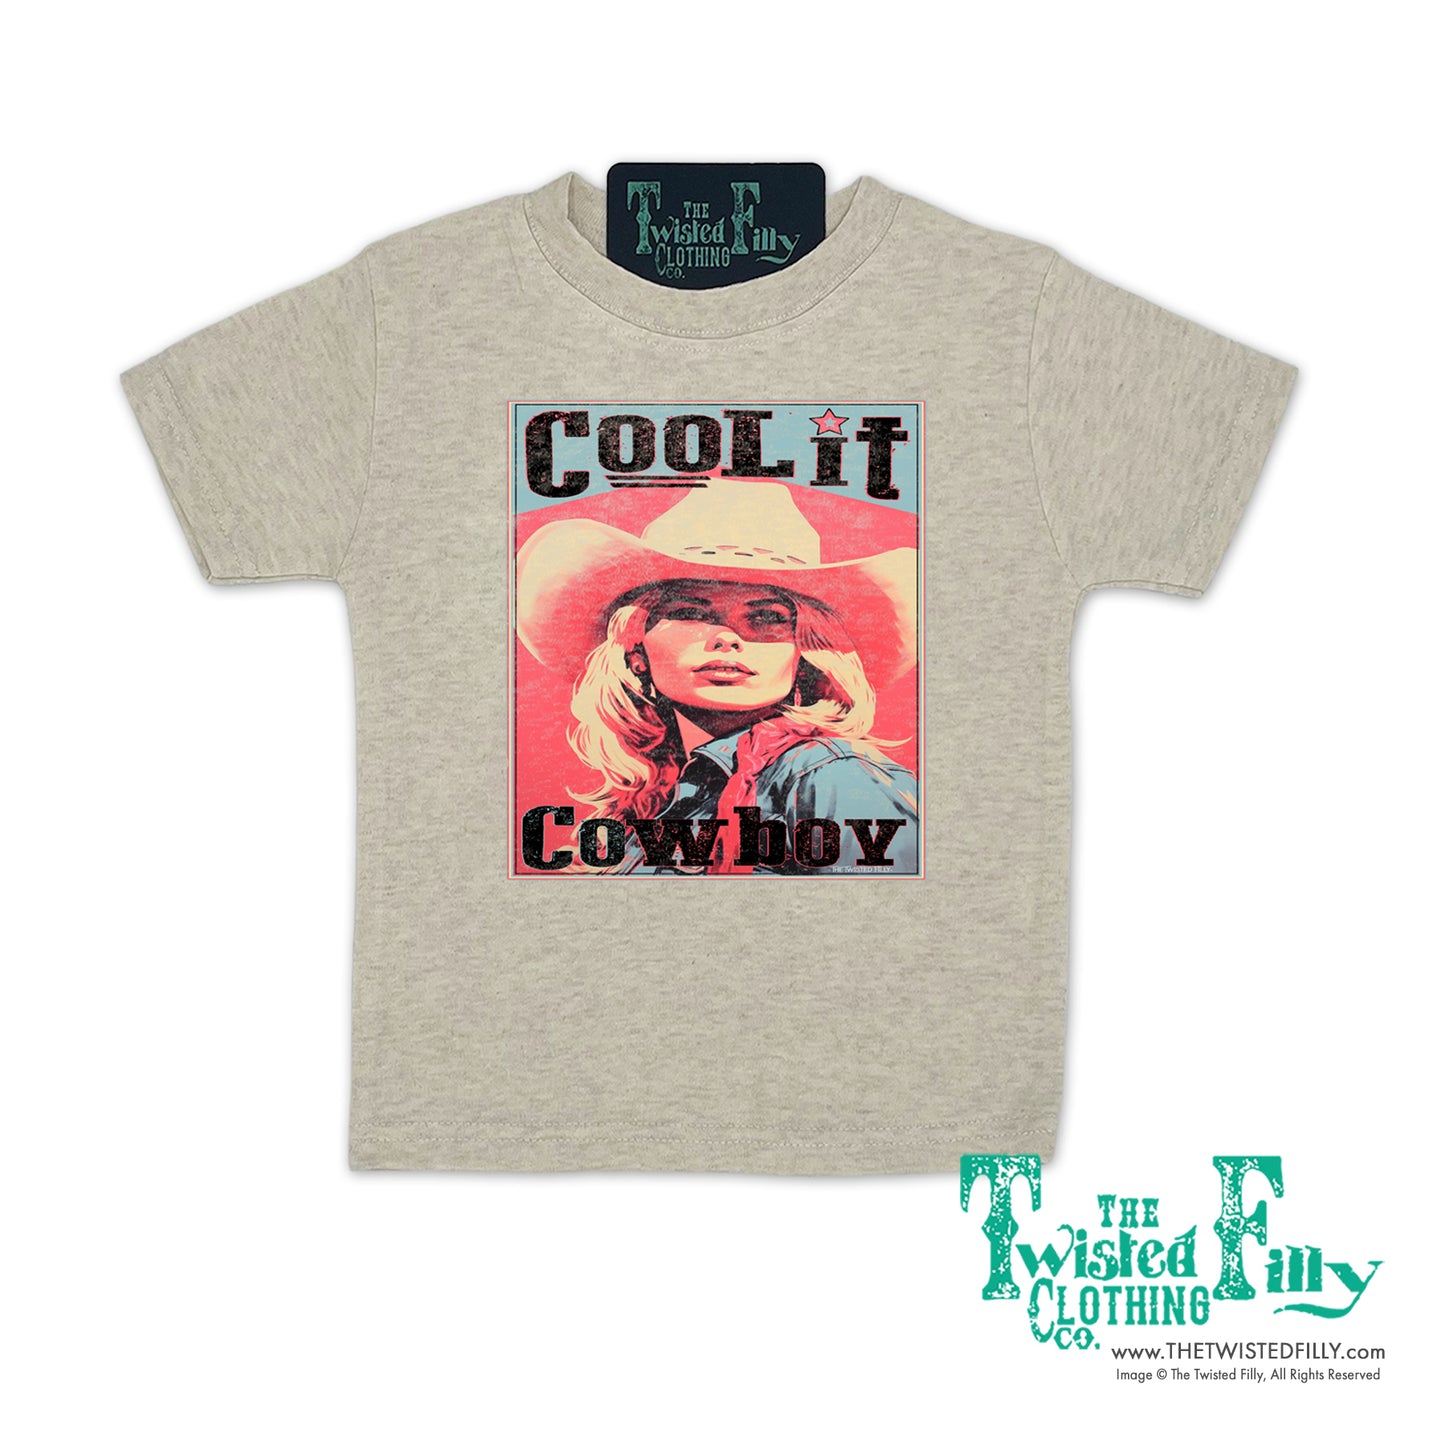 Cool It Cowboy - S/S Girls Youth Tee - Assorted Colors